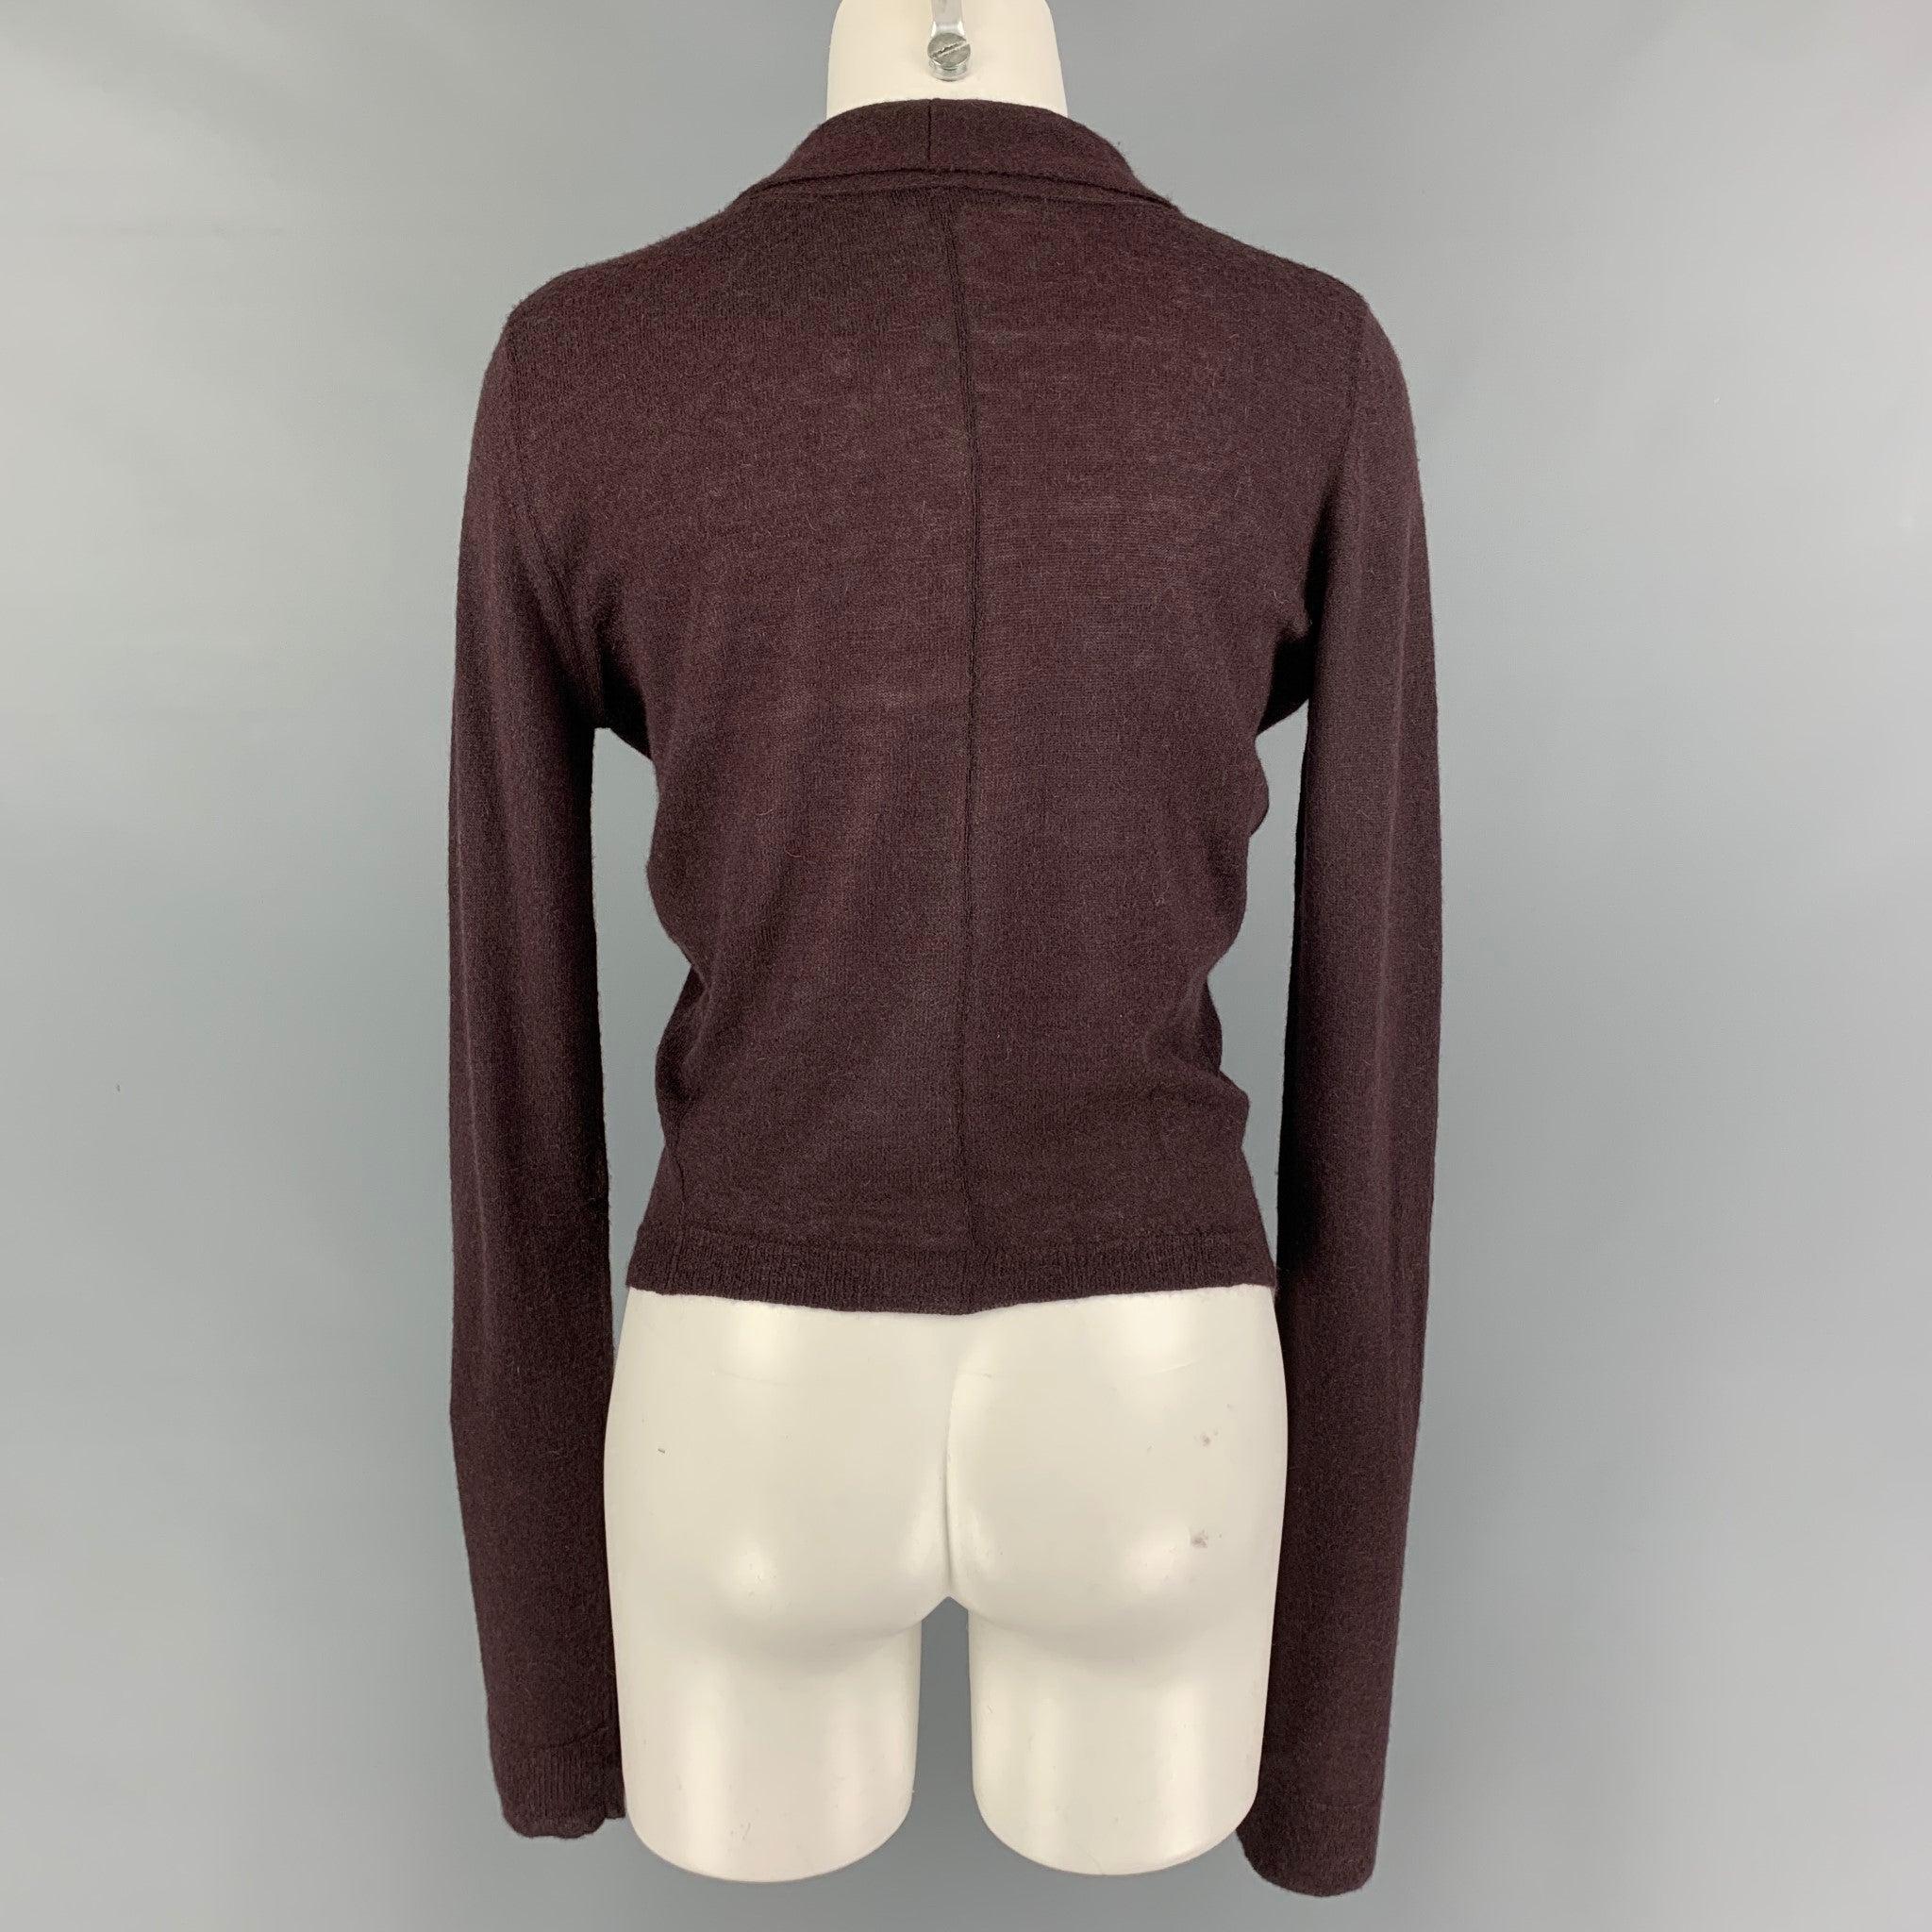 Women's ANN DEMEULEMEESTER Size 6 Burgundy Cashmere Blend Knitted Cardigan For Sale